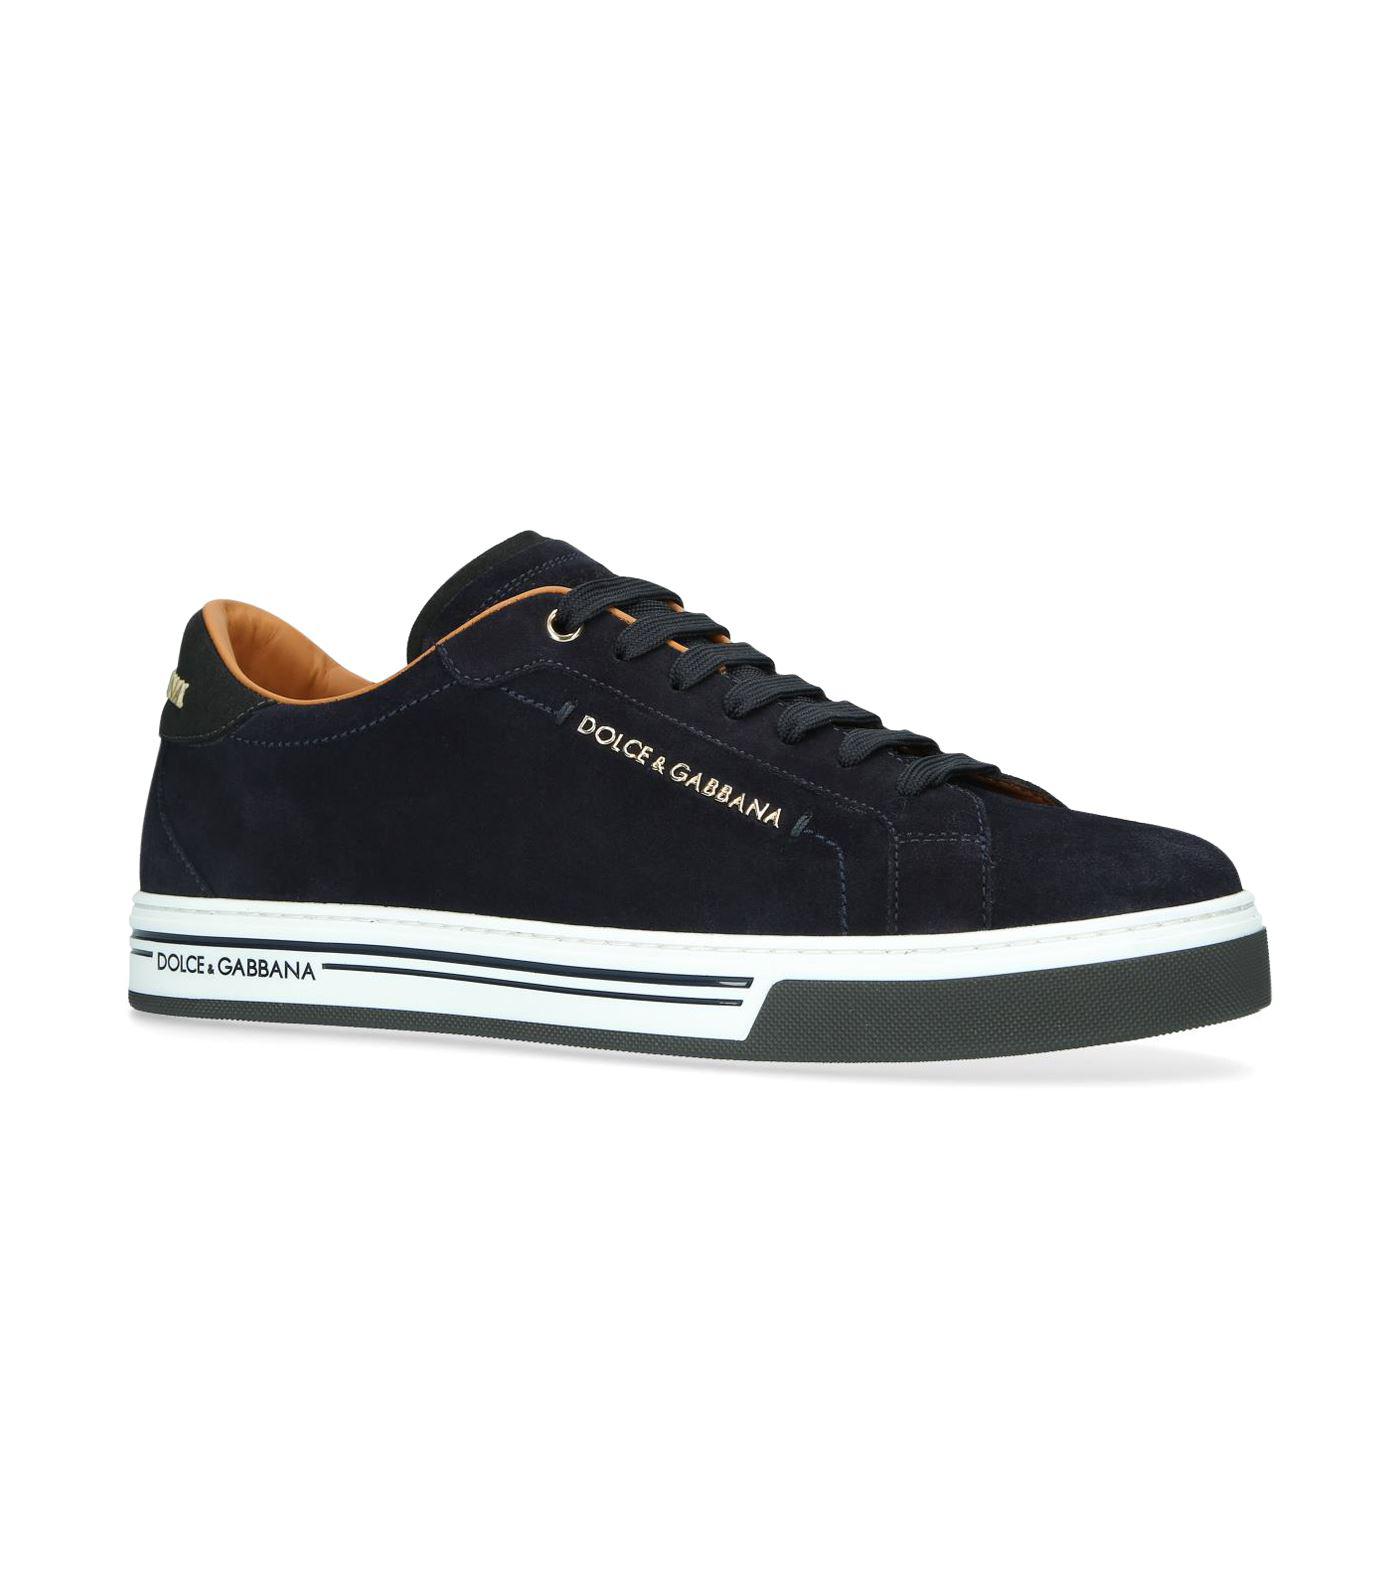 Dolce & Gabbana Suede Roma Sneakers in Navy (Blue) for Men - Lyst